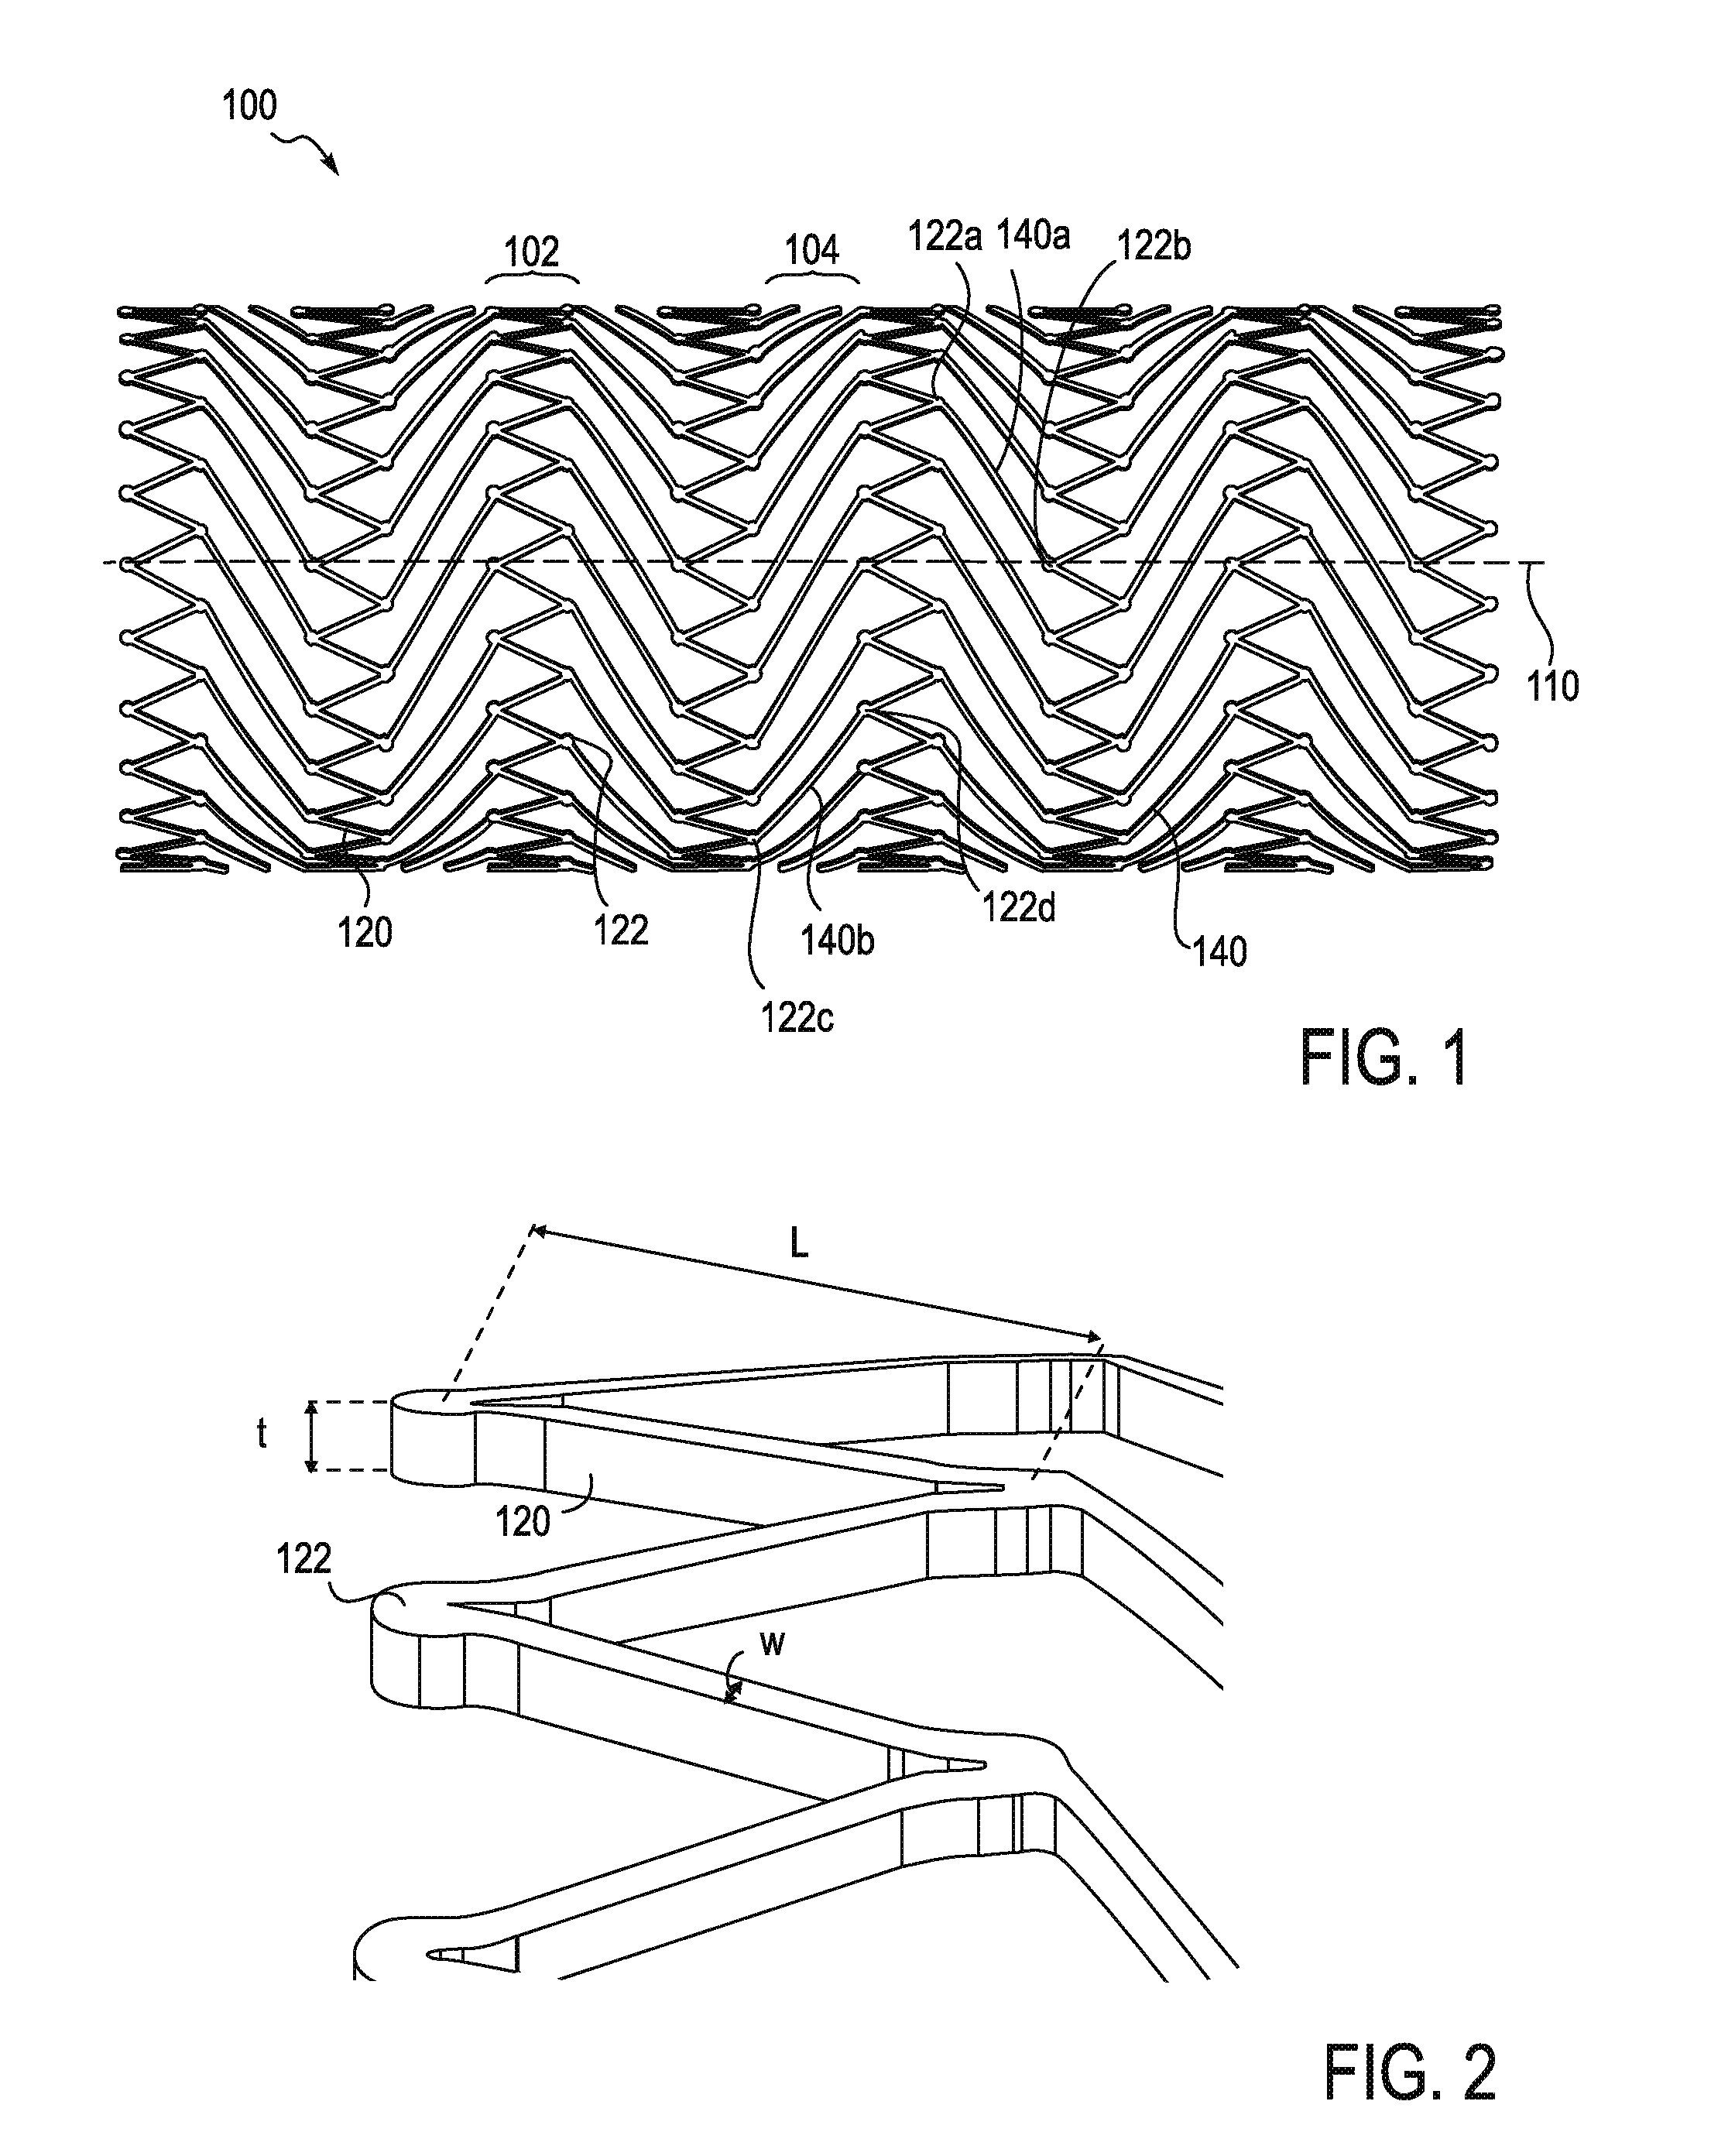 Alternating circumferential bridge stent design and methods for use thereof